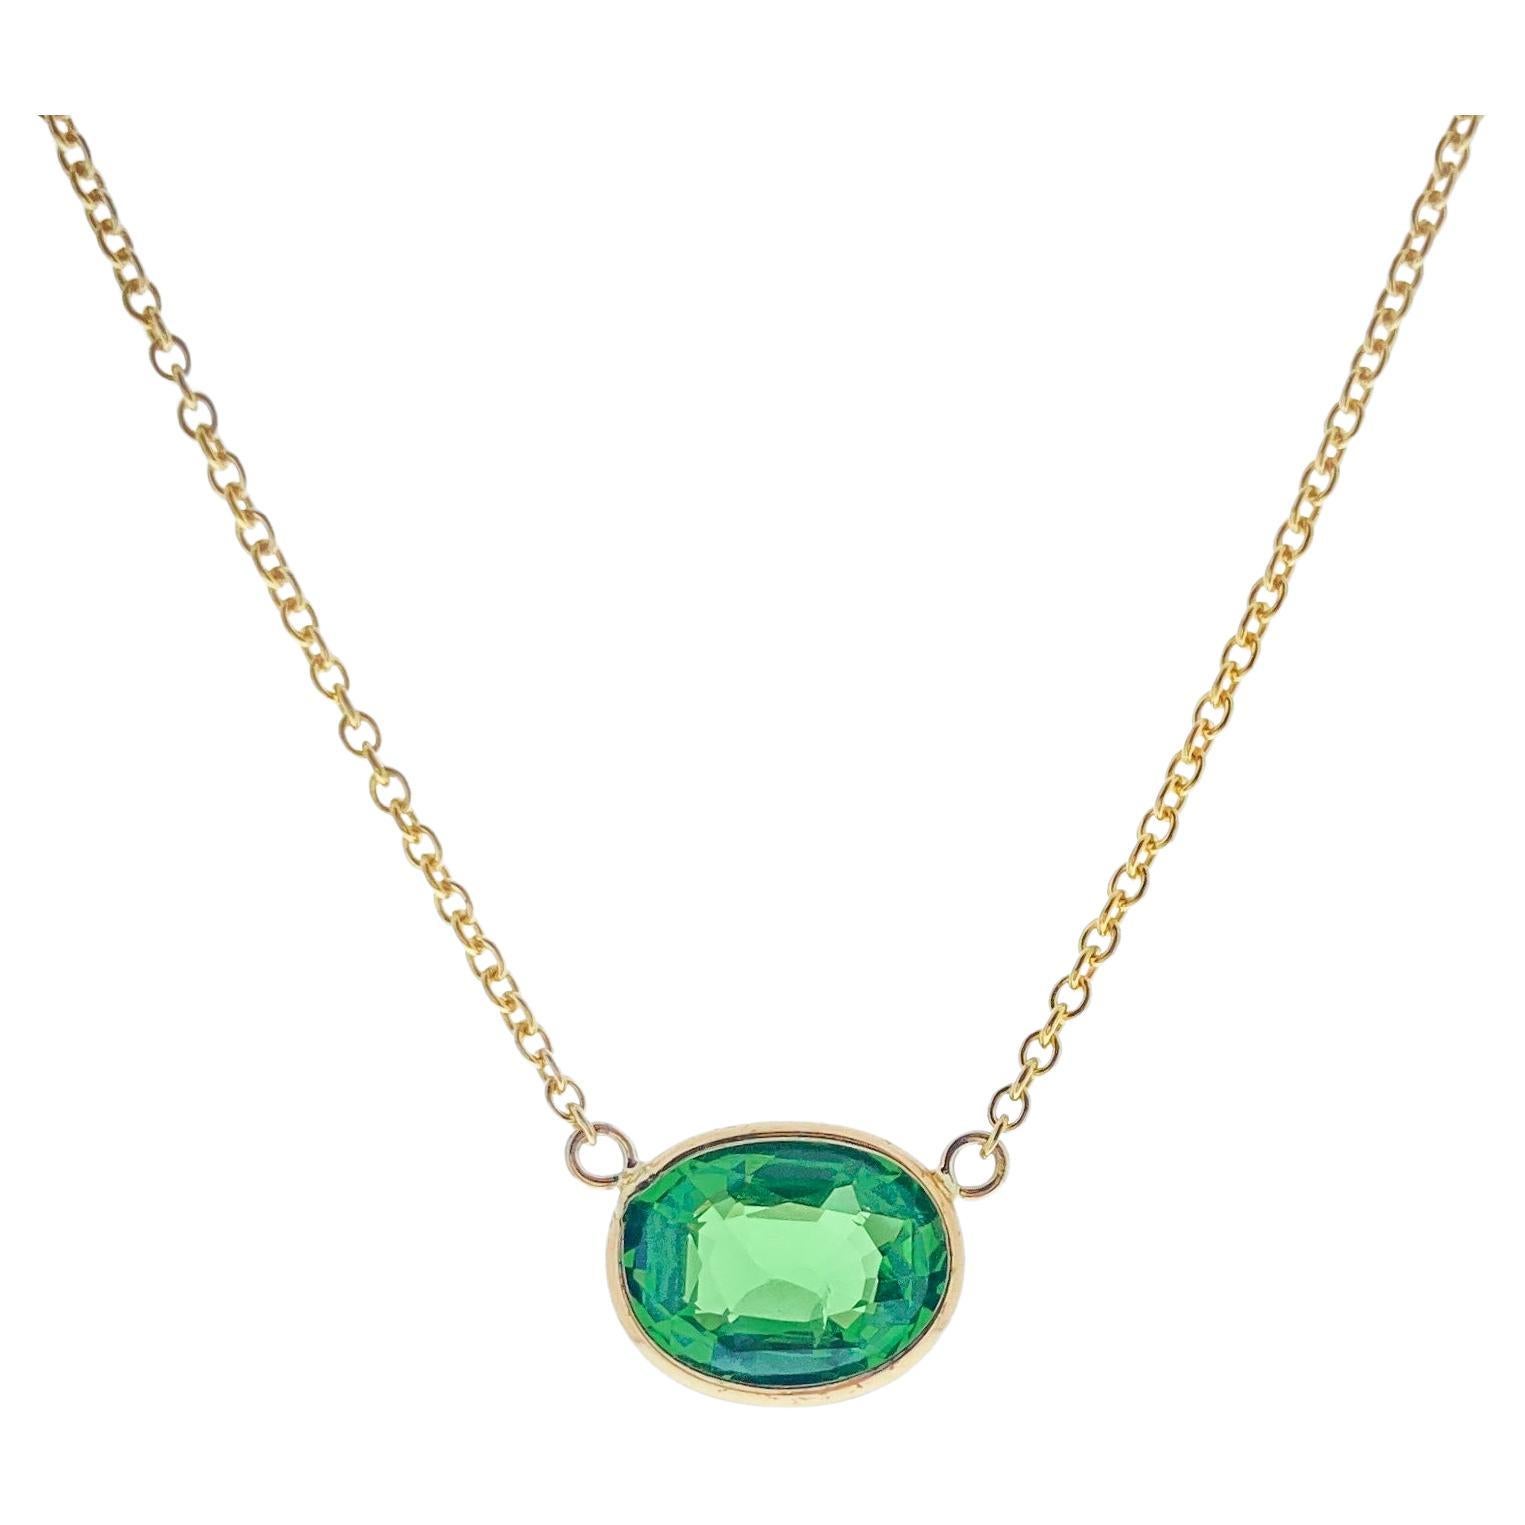 2.02 Carat Green Tsavorite Oval Cut Fashion Necklaces In 14K Yellow Gold 